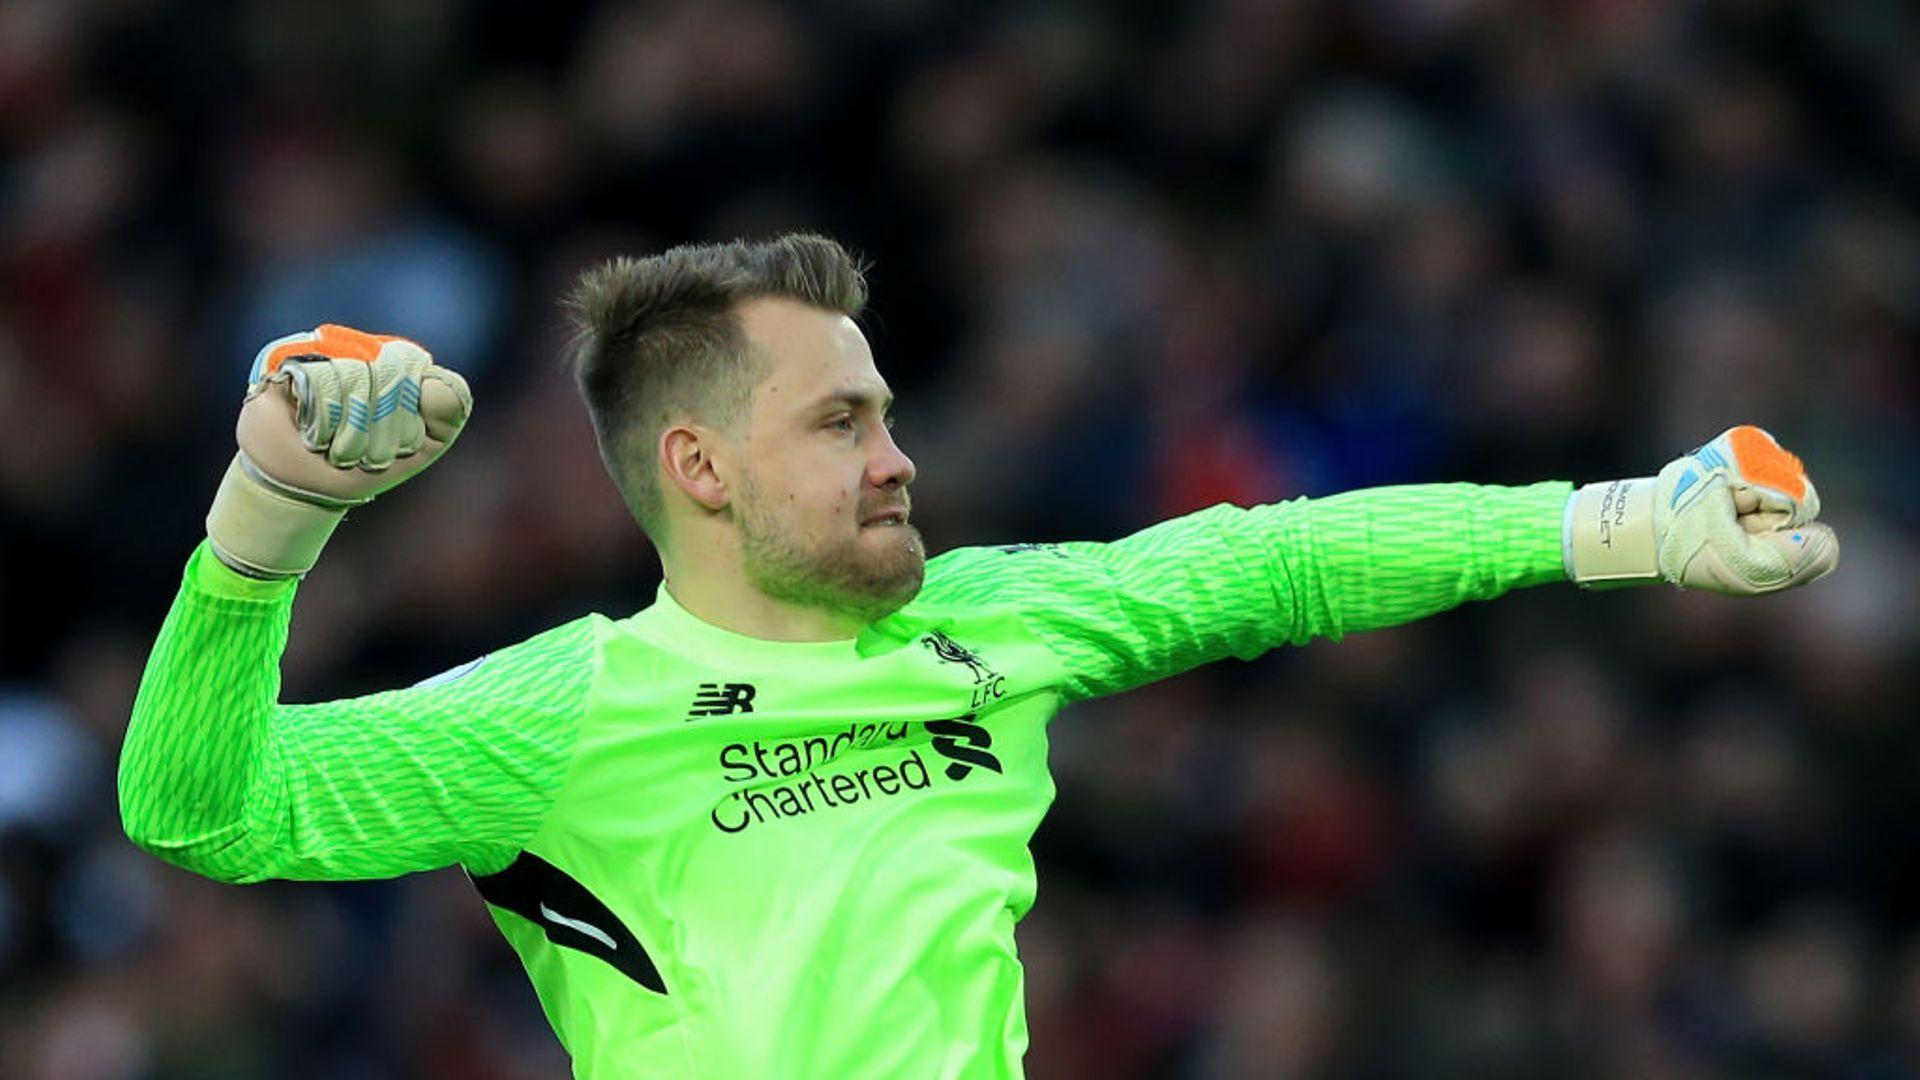 Liverpool's Simon Mignolet committed to proving himself in training